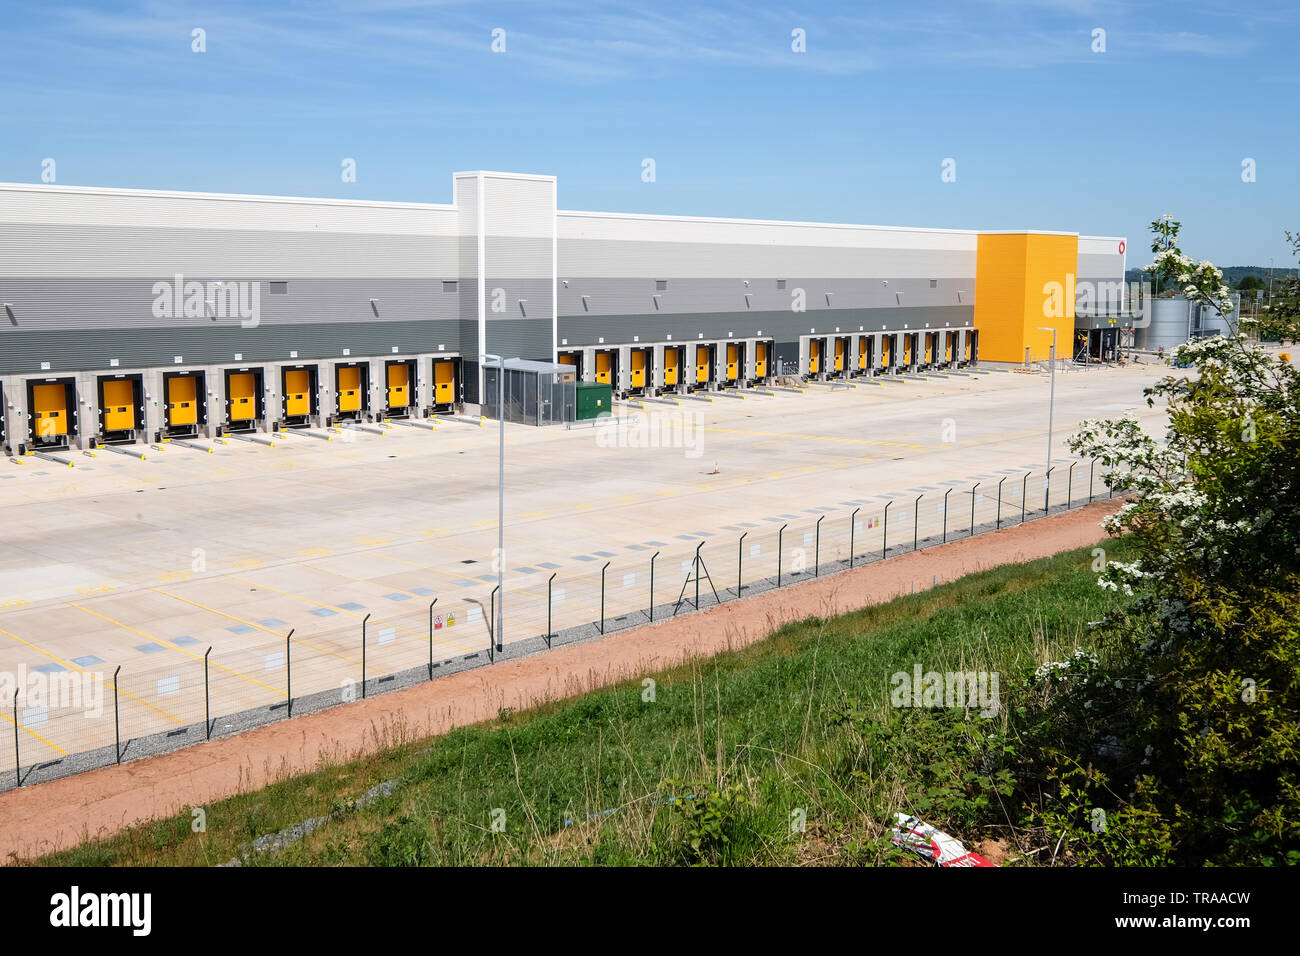 Amazon Lager an die East Midlands gateway Leicestershire Stockfoto